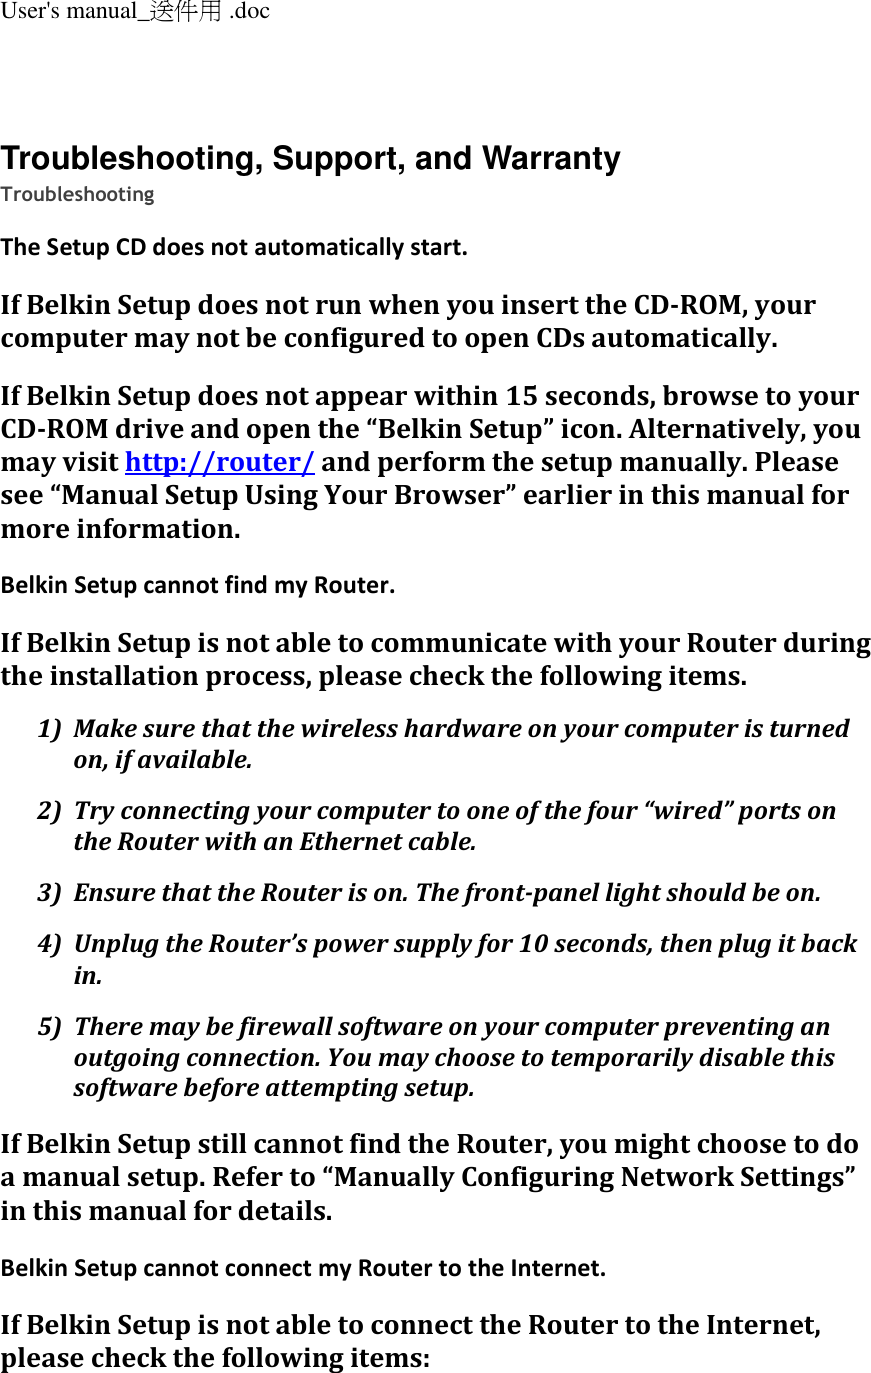 User&apos;s manual_送件用 .doc   Troubleshooting, Support, and Warranty Troubleshooting The Setup CD does not automatically start. If Belkin Setup does not run when you insert the CD-ROM, your computer may not be configured to open CDs automatically. If Belkin Setup does not appear within 15 seconds, browse to your CD-ROM drive and open the “Belkin Setup” icon. Alternatively, you may visit http://router/ and perform the setup manually. Please see “Manual Setup Using Your Browser” earlier in this manual for more information. Belkin Setup cannot find my Router. If Belkin Setup is not able to communicate with your Router during the installation process, please check the following items. 1) Make sure that the wireless hardware on your computer is turned on, if available. 2) Try connecting your computer to one of the four “wired” ports on the Router with an Ethernet cable. 3) Ensure that the Router is on. The front-panel light should be on. 4) Unplug the Router’s power supply for 10 seconds, then plug it back in. 5) There may be firewall software on your computer preventing an outgoing connection. You may choose to temporarily disable this software before attempting setup. If Belkin Setup still cannot find the Router, you might choose to do a manual setup. Refer to “Manually Configuring Network Settings” in this manual for details. Belkin Setup cannot connect my Router to the Internet. If Belkin Setup is not able to connect the Router to the Internet, please check the following items: 